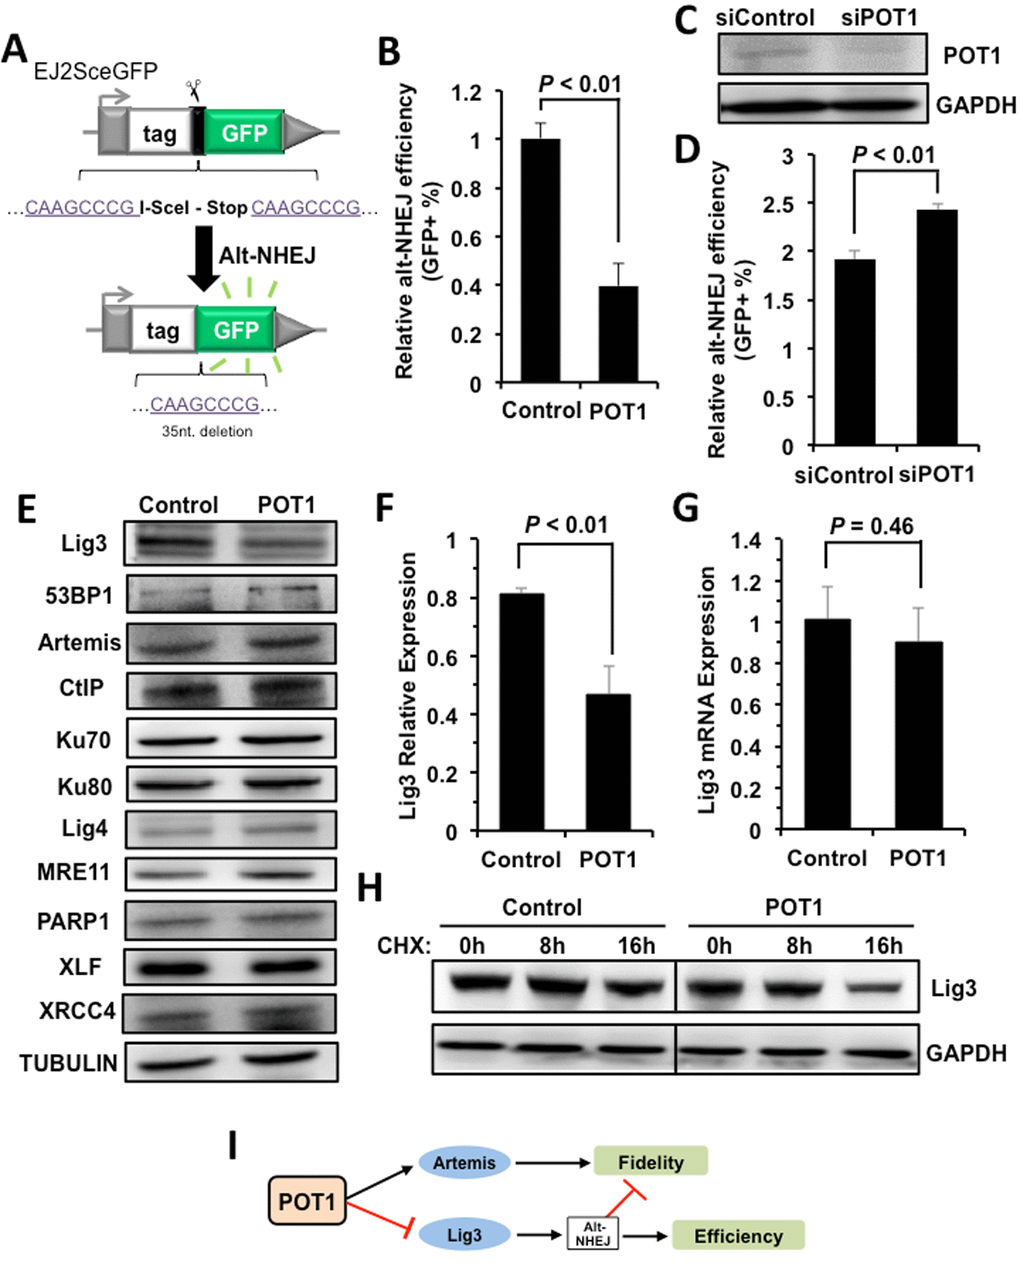 POT1 inhibits alt-NHEJ efficiency and promotes the degradation of Lig3. (A) Schematic diagram of EJ2-GFP for analyzing the alt-NHEJ efficiency. The mechanism of the reporter cassette is as previously described [6]. (B) Overexpression of POT1 inhibits alt-NHEJ efficiency. The reporter construct was digested with I-SceI restriction enzyme in vitro, followed by being transfected to HCA2-hTERT cells together with a control vector or a plasmid encoding POT1. On day 3 post transfection, cells were harvested for FACS analysis. (C) and (D) Mildly knocking down POT1 in HeLa cells significantly stimulates the alt-NHEJ efficiency. HeLa cells were transfected with siRNA against POT1 twice with two days interval, followed by a transfection of I-SceI linearized EJ2-GFP reporter. On day 3 post transfection, cells were harvested for FACS analysis. (E) Expression of important NHEJ factors in the absence or presence of POT1 overexpression. (F) Quantification of Lig3 expression using ImageJ software. The relative expression of Lig3 is calculated as the ratio of Lig3 expression versus TUBULIN. (G) Lig3 expression was not affected at transcriptional level in POT1 overexpressing cells. At 24 h post POT1 transfection, cells were harvested for mRNA extraction. Then Quantitative PCR analysis was performed with primers indicated. The primers used for q-PCR of Lig3 are as follows: Forward: 5’- TATGGCACGGGACCTAG -3’, Reverse: 5’- CTGTTGCTGCTCATCCTC -3’. The primers used for q-PCR of GAPDH are as follows: Forward: 5’ATGACATCAAGAAGGTGGTG3’, Reverse: 5’CATACCAGGAAATGAGCTTG3’. The transcript level of Lig3 was determined using delta CT method [38]. (H) POT1 overexpression promotes Lig3 degradation. 293FT cells with a control vector or a vector encoding POT1 transfected were treated with cycloheximide (CHX) at 50 μg/ml. At different time points post the treatment, cells were harvested for Western blot analysis. (I) The model of POT1 regulating DNA DSB repair at non-telomeric regions.